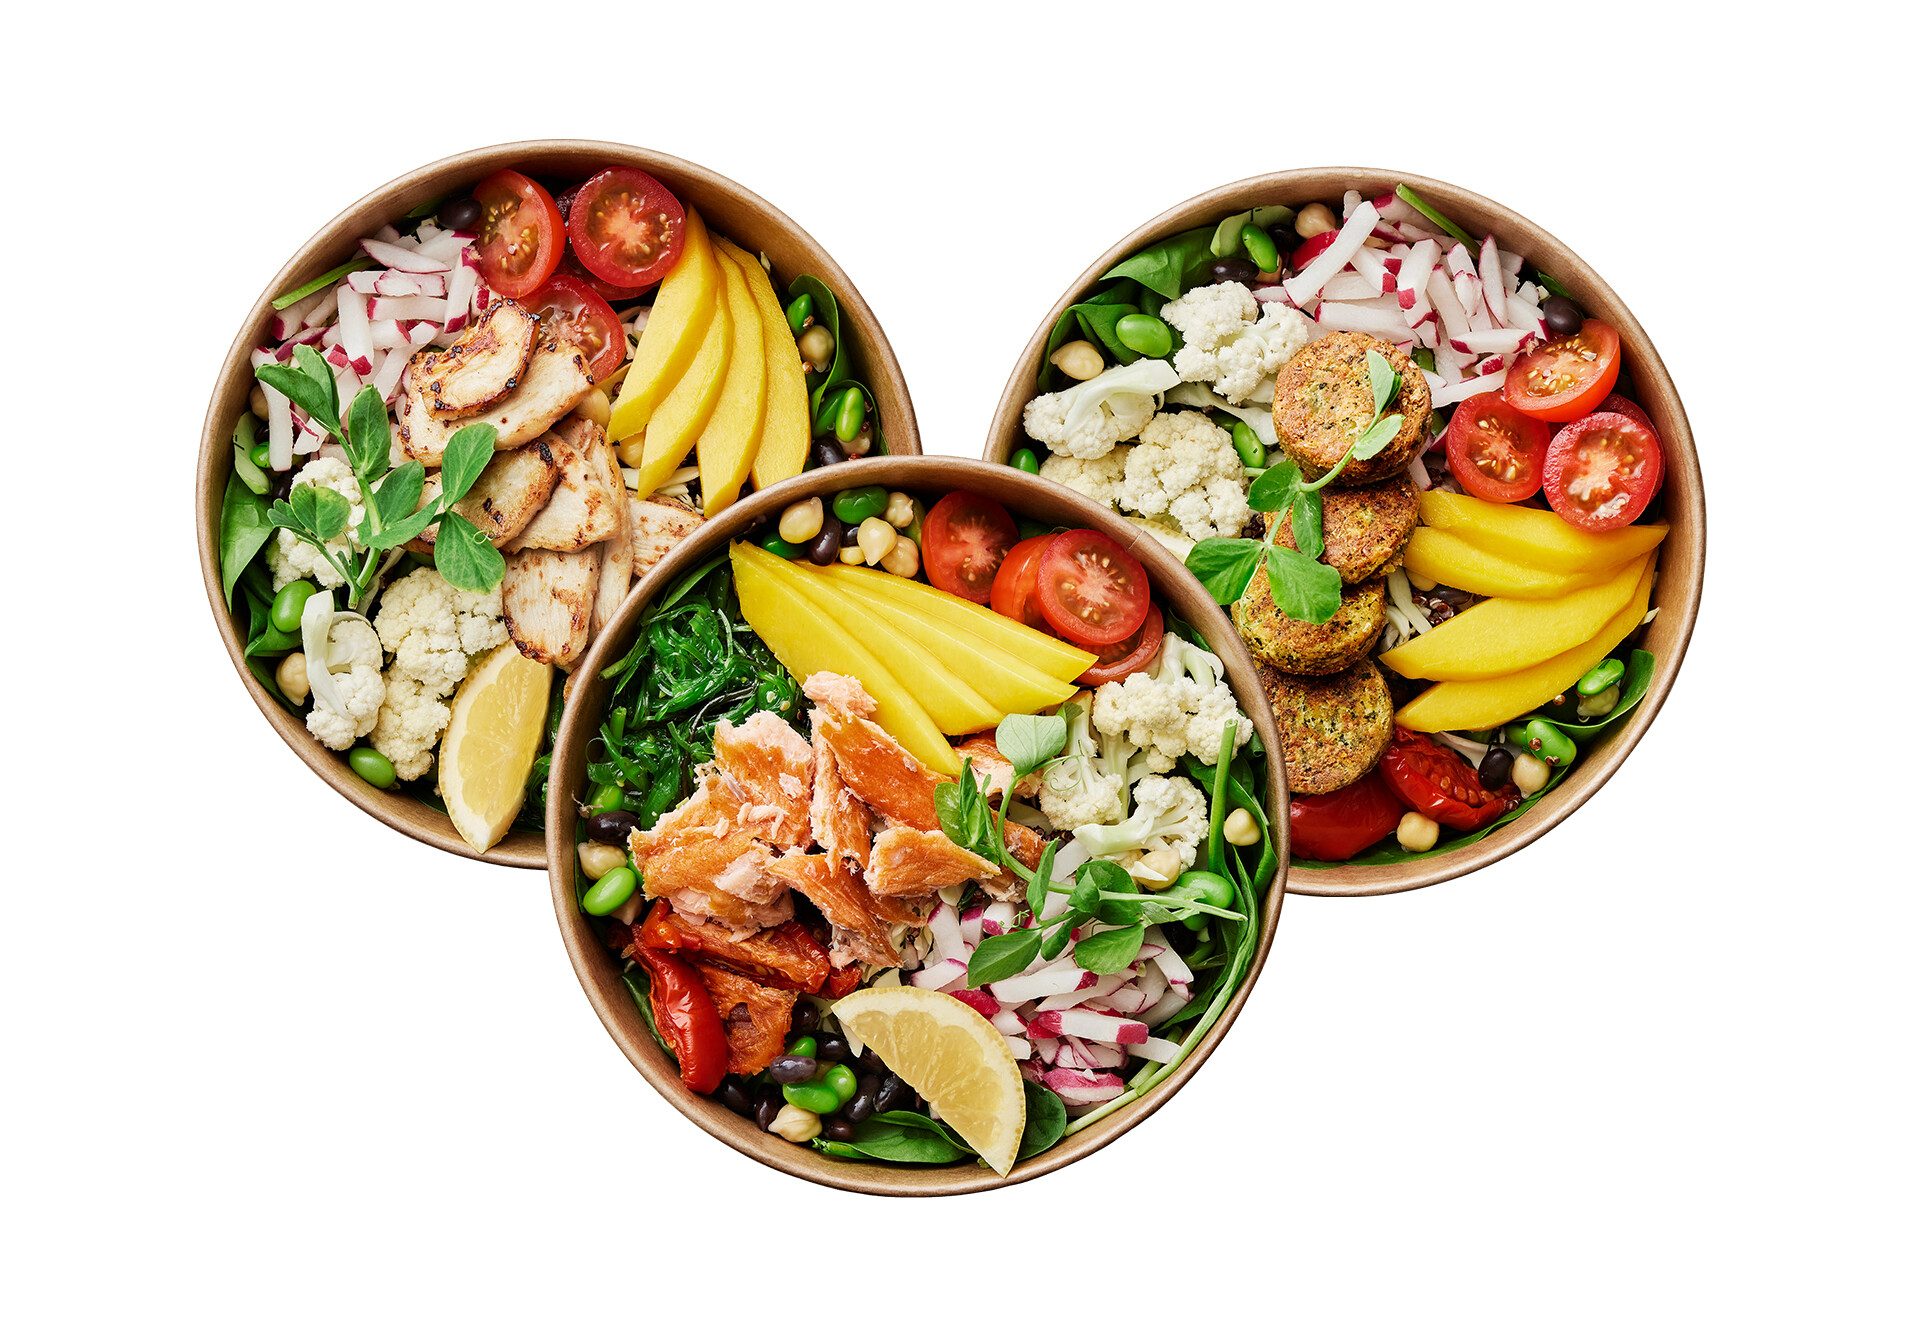 Salad bowls with chicken, falafel or salmon